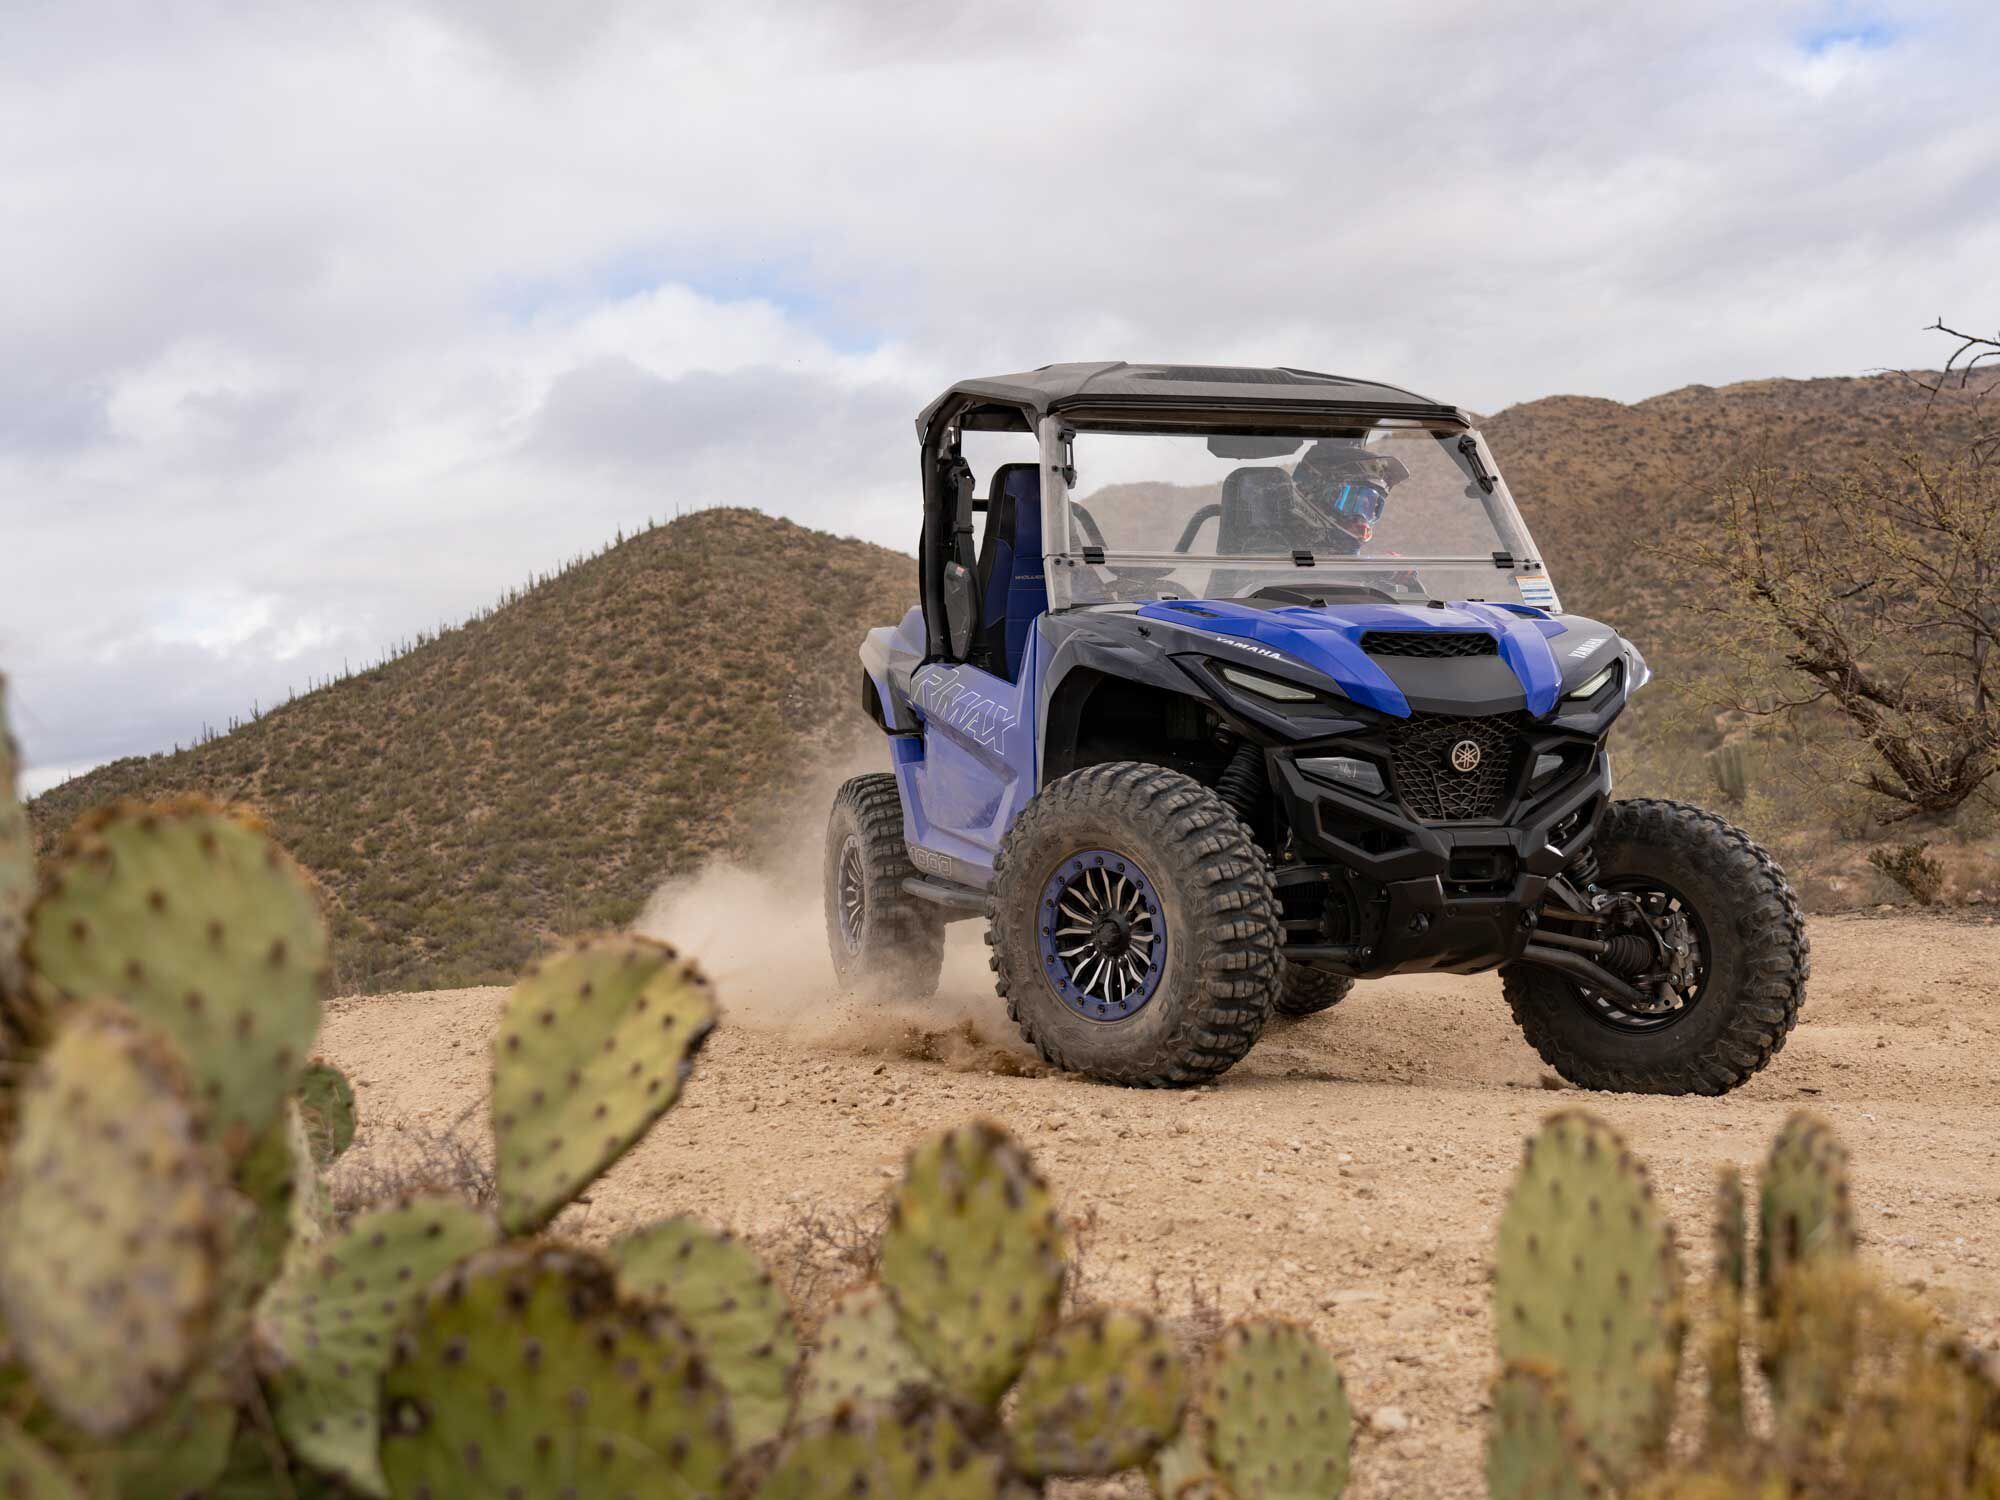 Sand, trail, rocks, and mud: The 2022 Wolverine RMAX2 1000 Sport might just be the best do-it-all side-by-side to date.